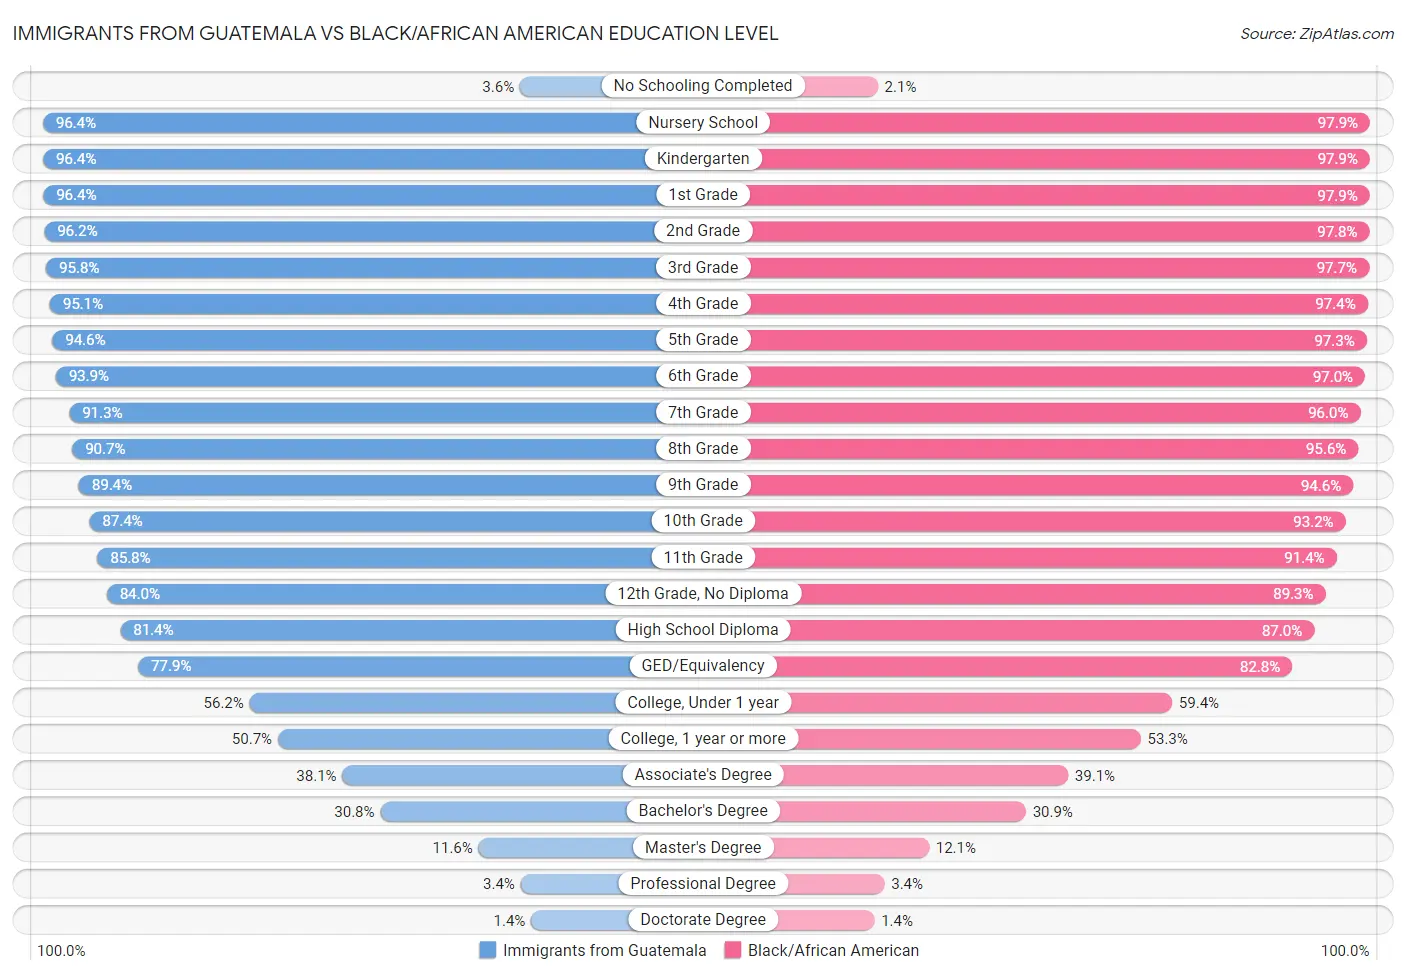 Immigrants from Guatemala vs Black/African American Education Level